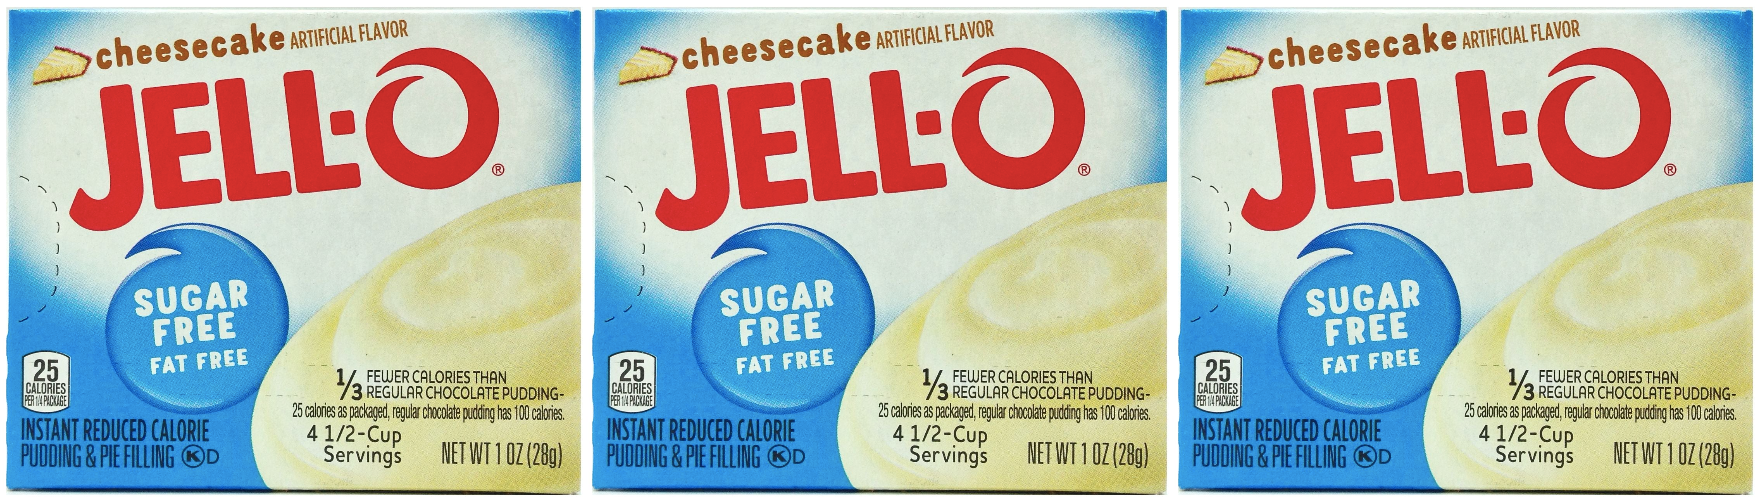 #Flavor_Cheesecake (1 oz) #Size_3-Pack